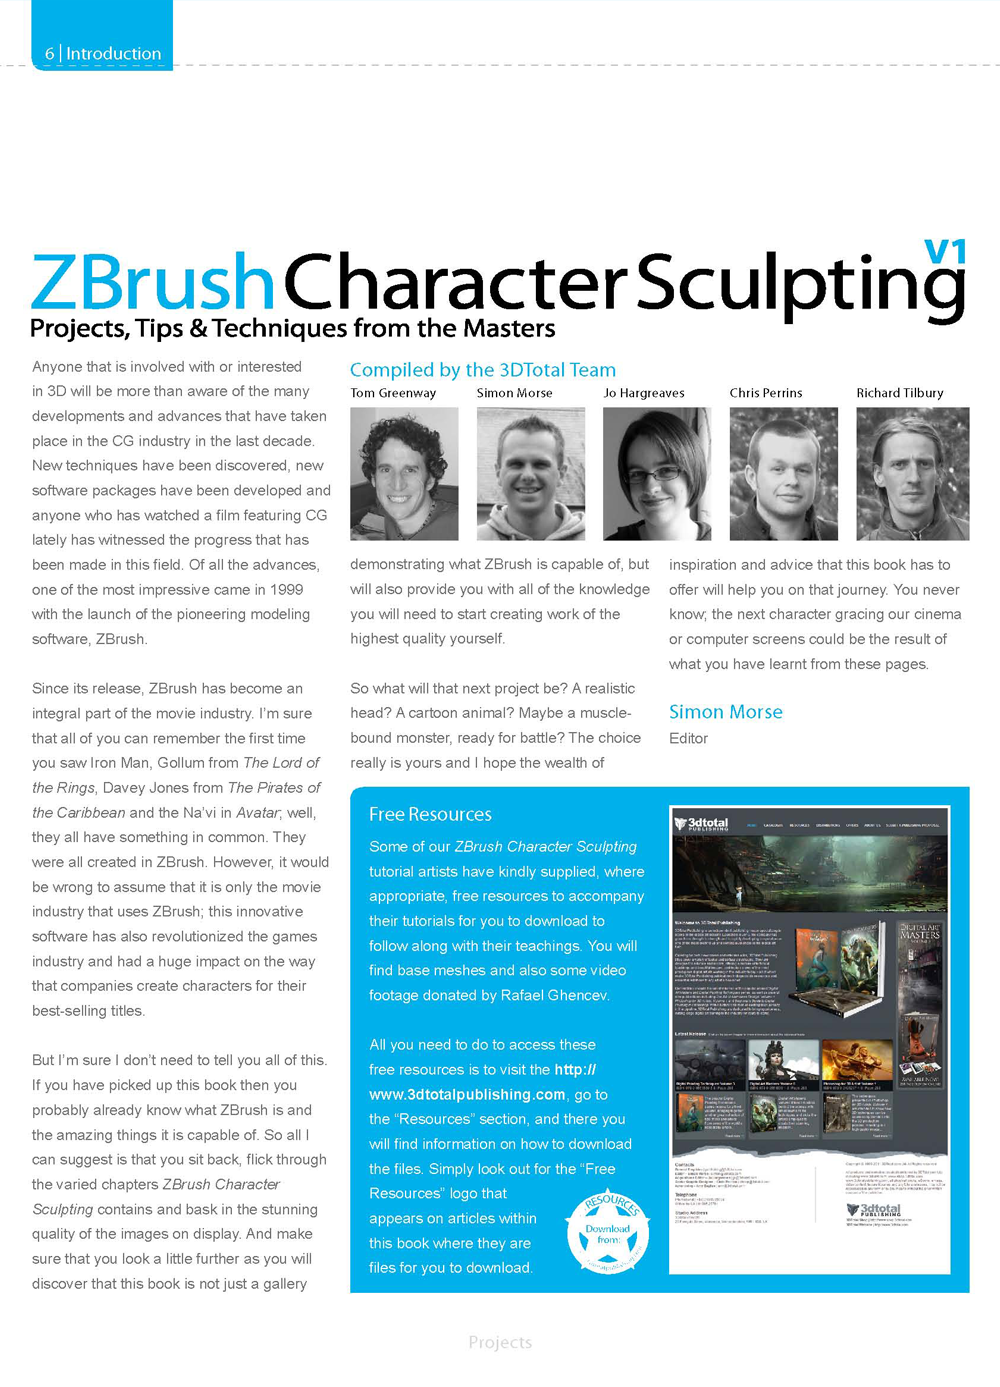 ZBrush Character Sculpting: Volume 1 - SOLD OUT!